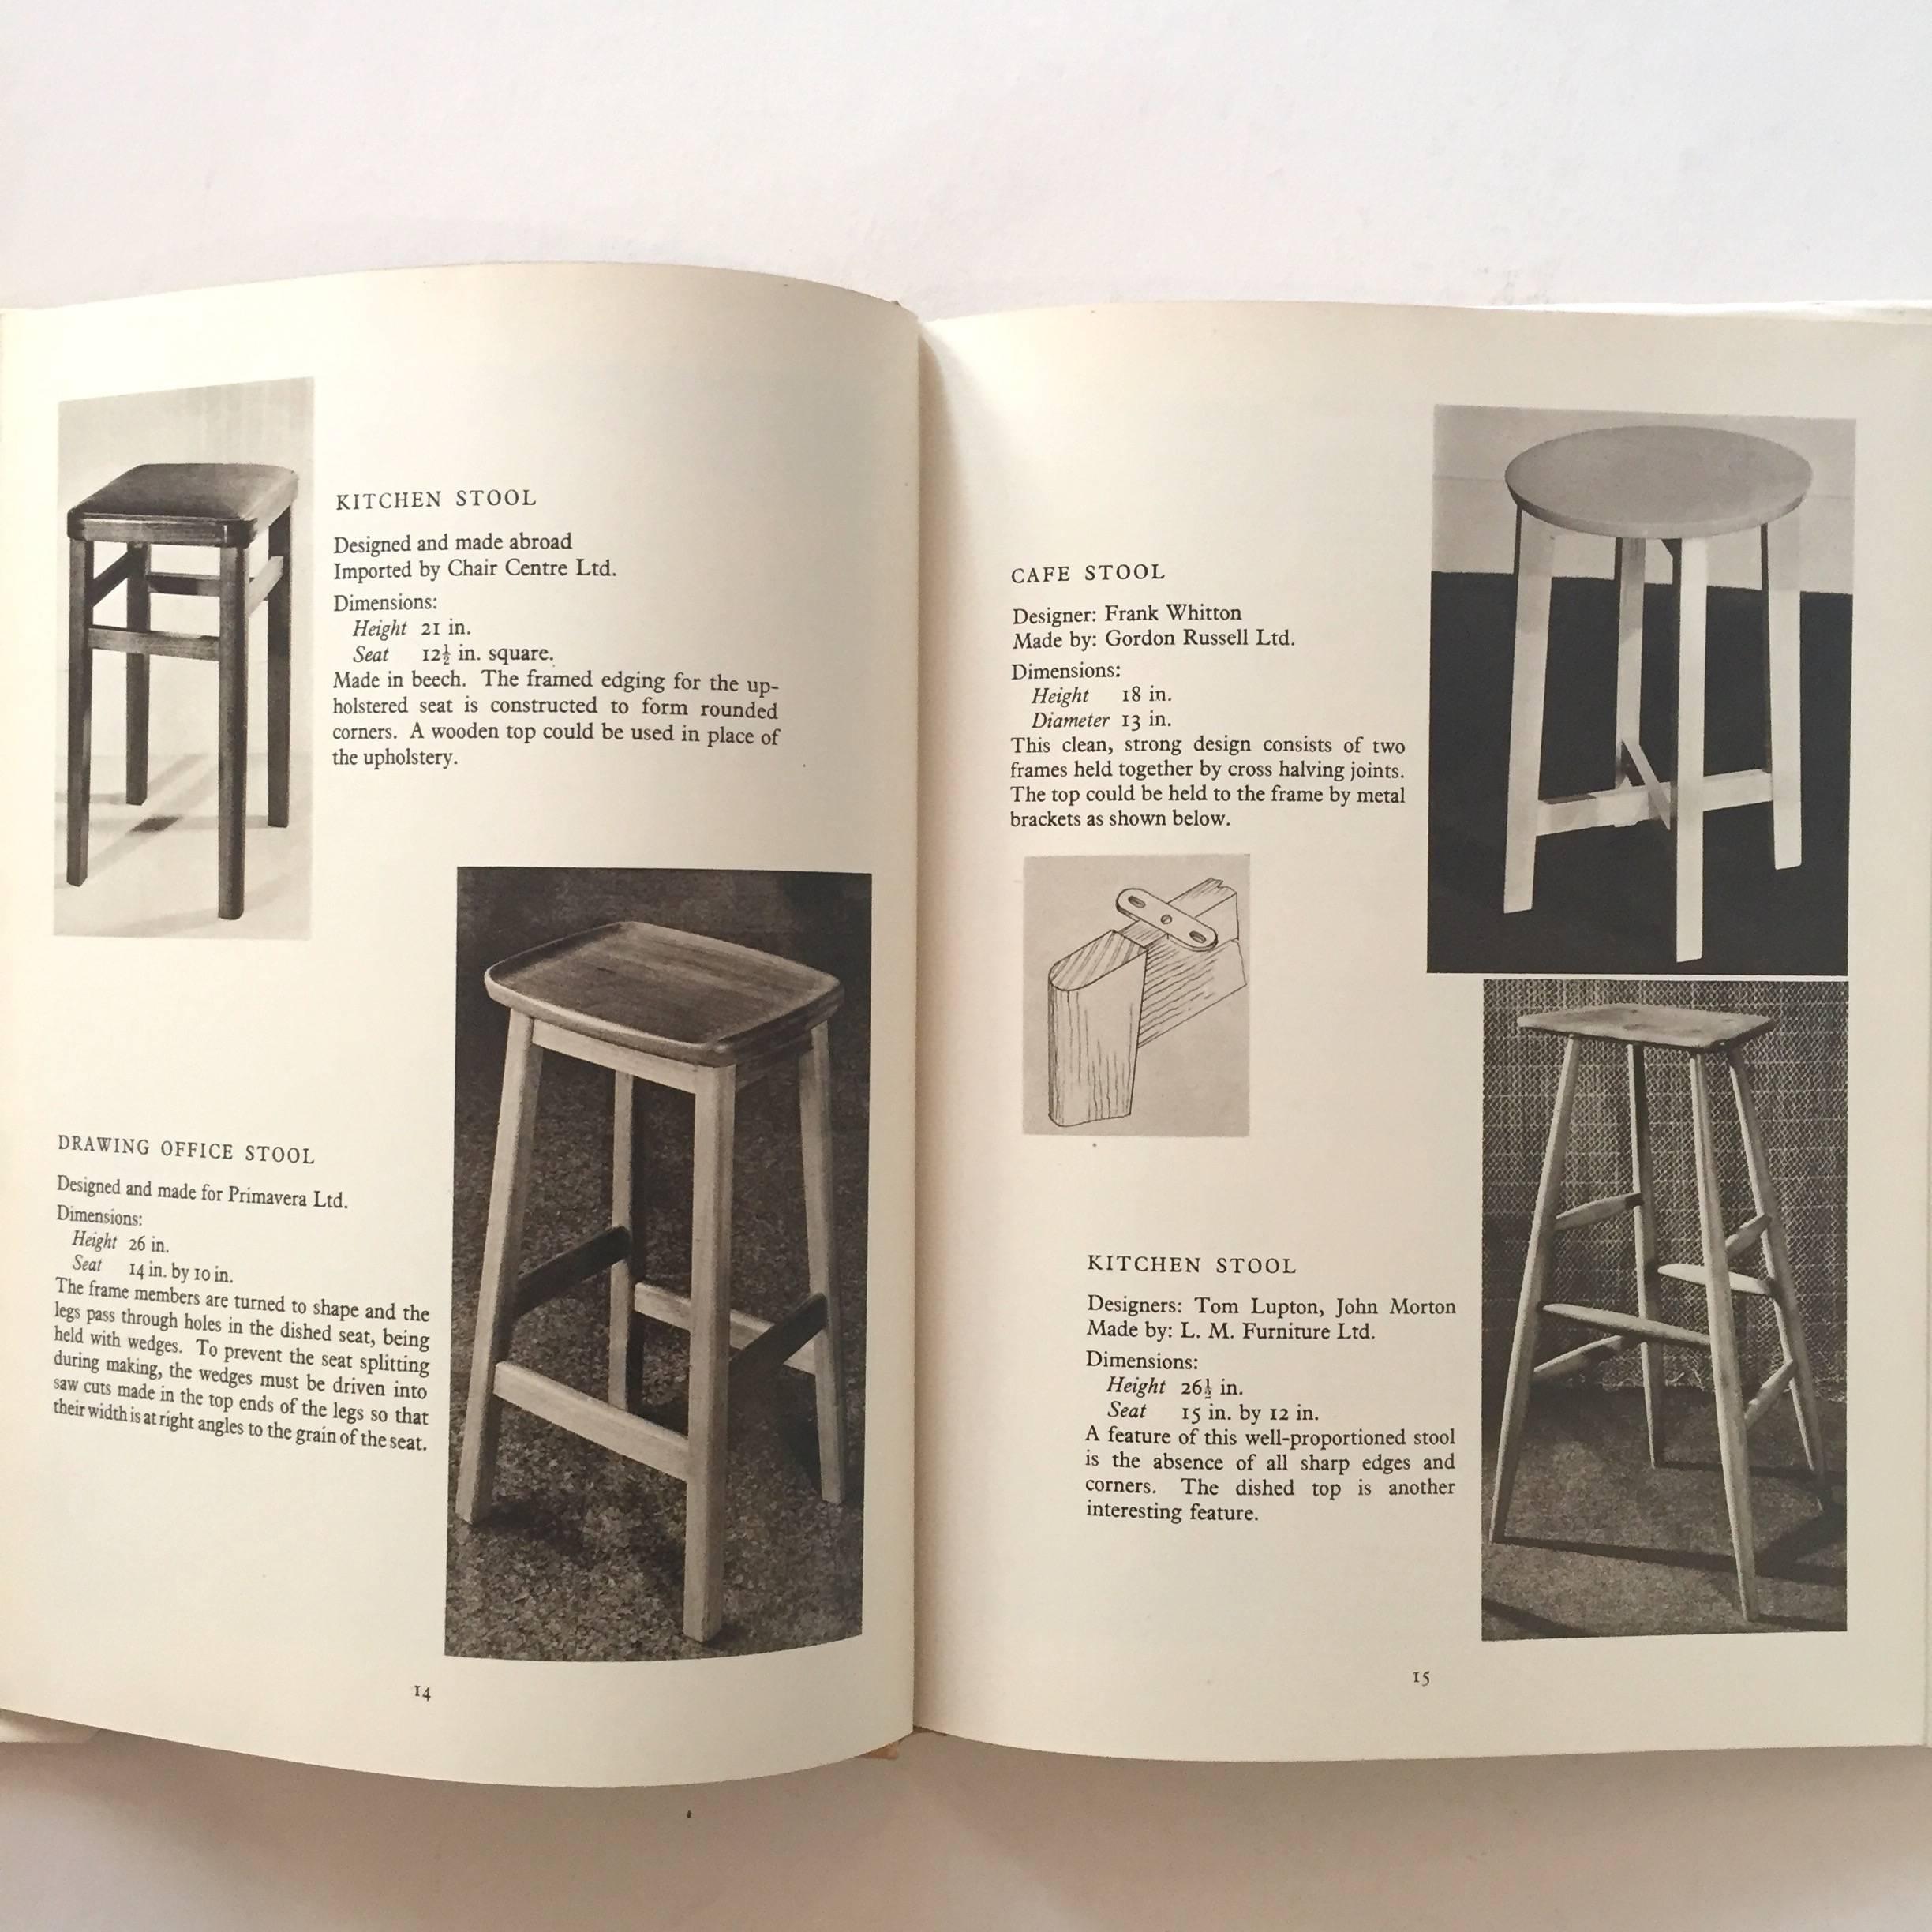 20th Century S. H Glenister, Contemporary Design in Woodwork, 1955